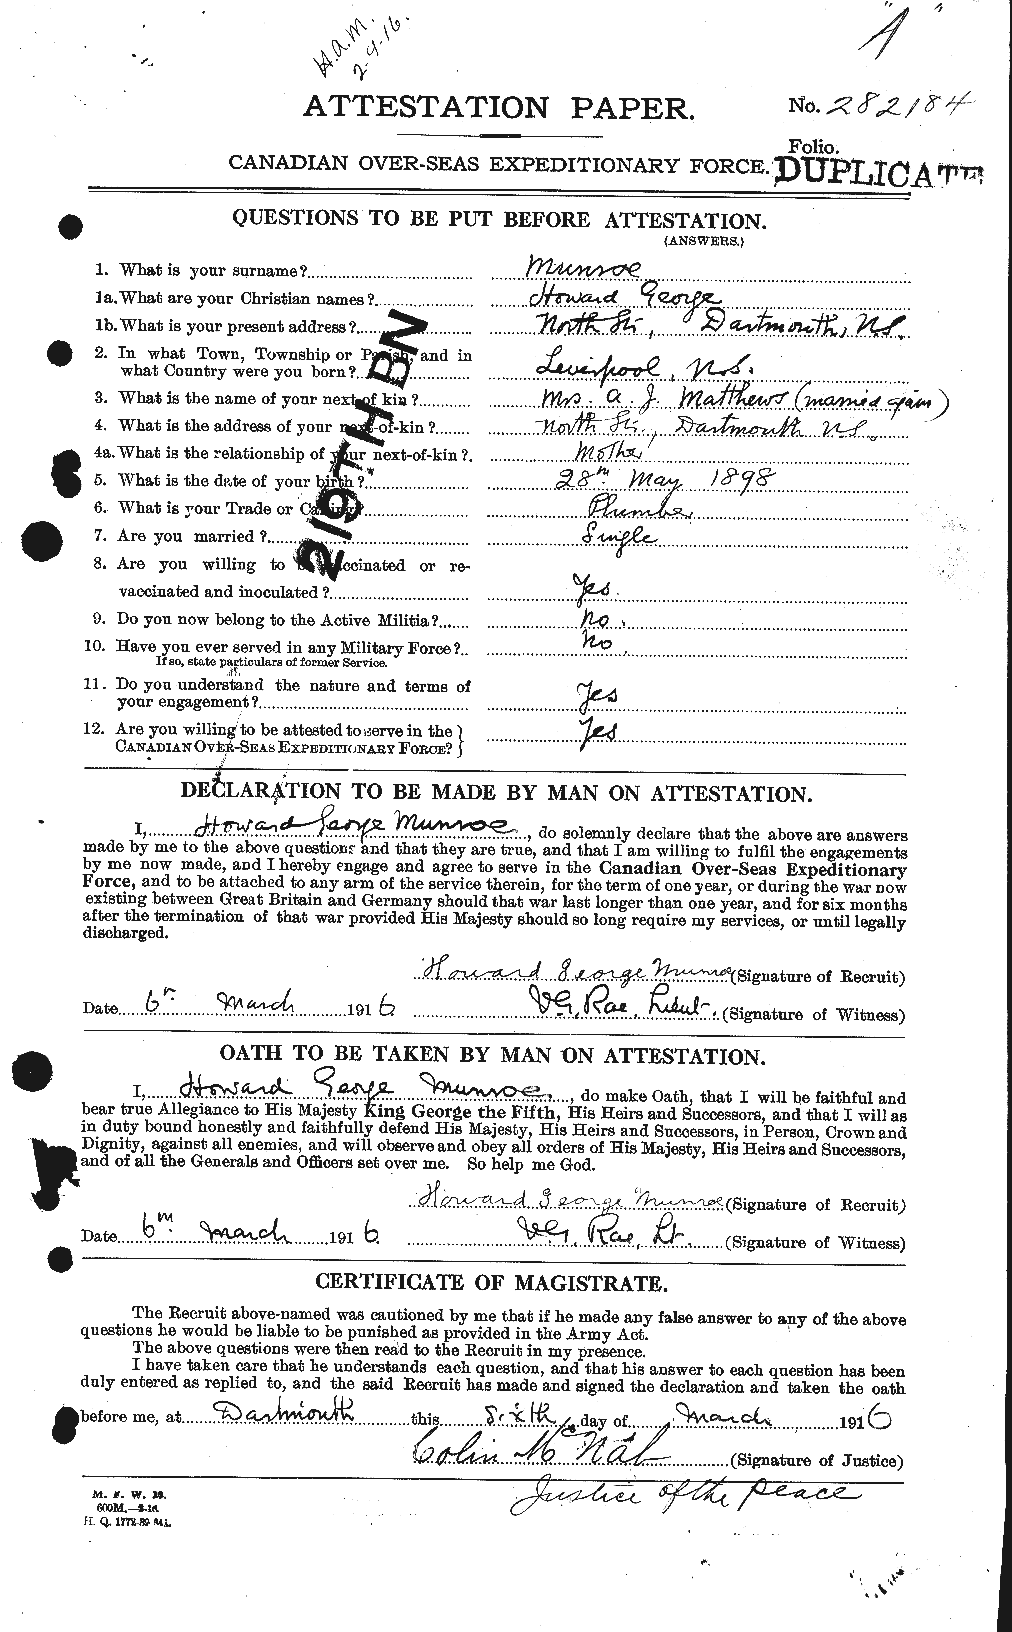 Personnel Records of the First World War - CEF 515523a